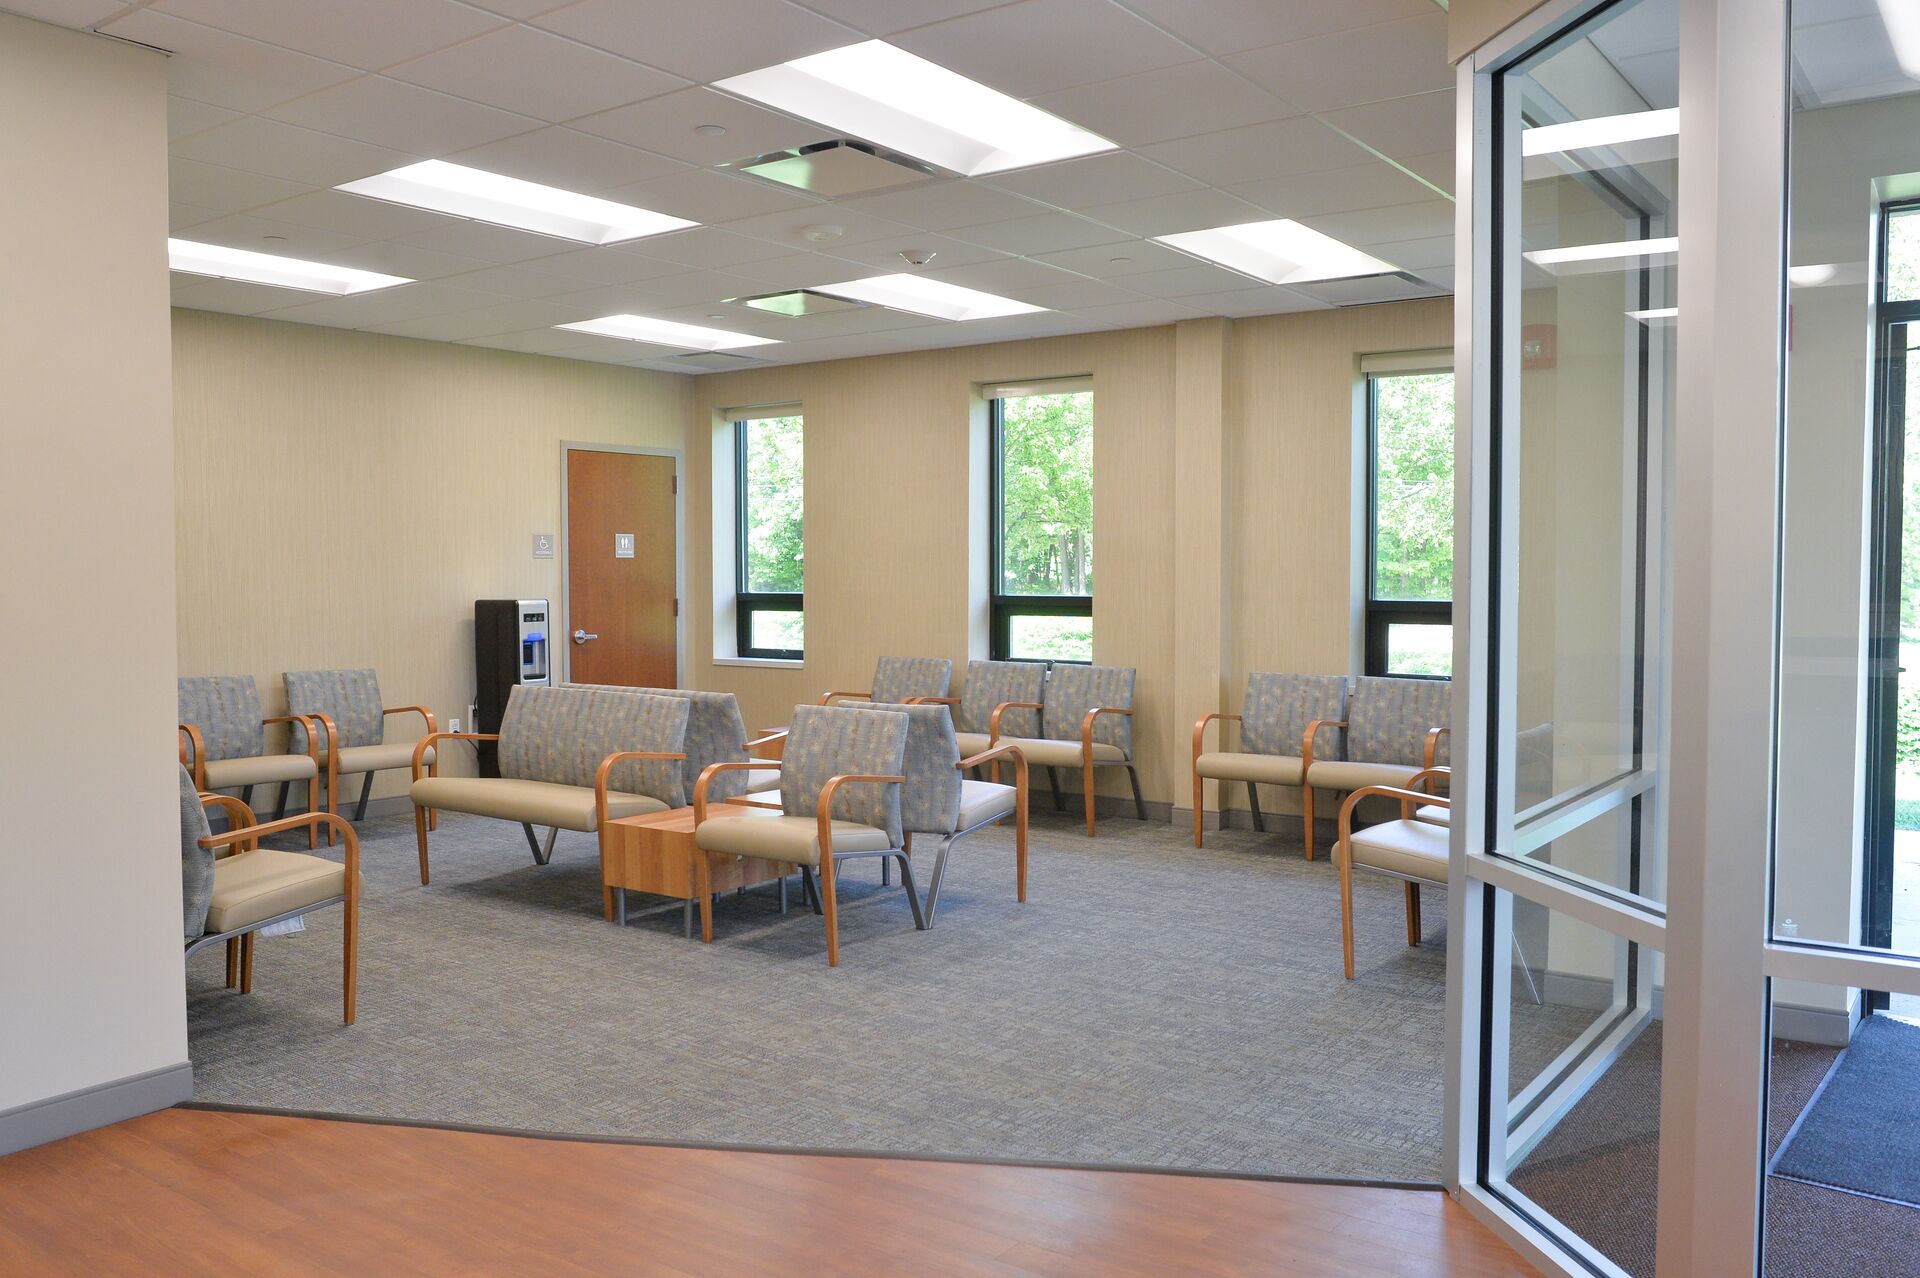 Image 5 | Women's Pelvic Health and Continence Center